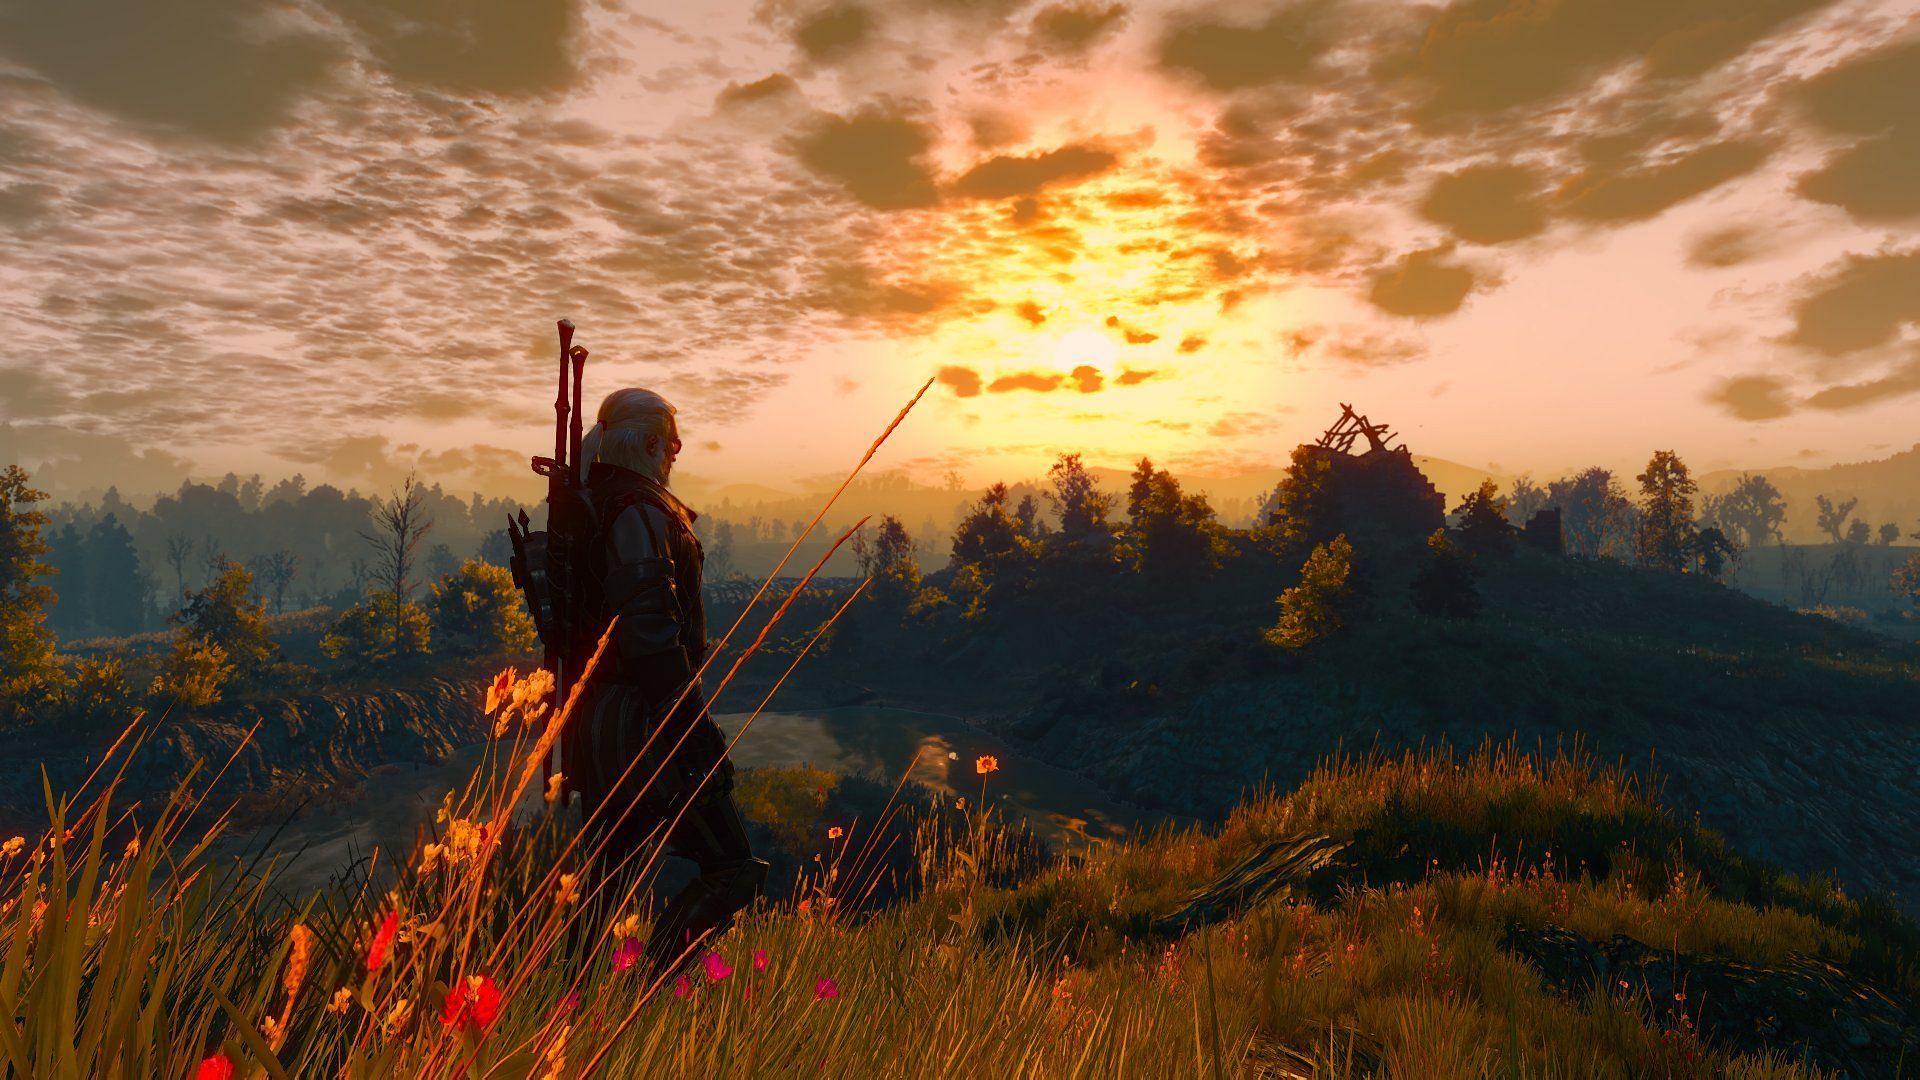 Here are all the Alternative looks in The Witcher 3 ranked